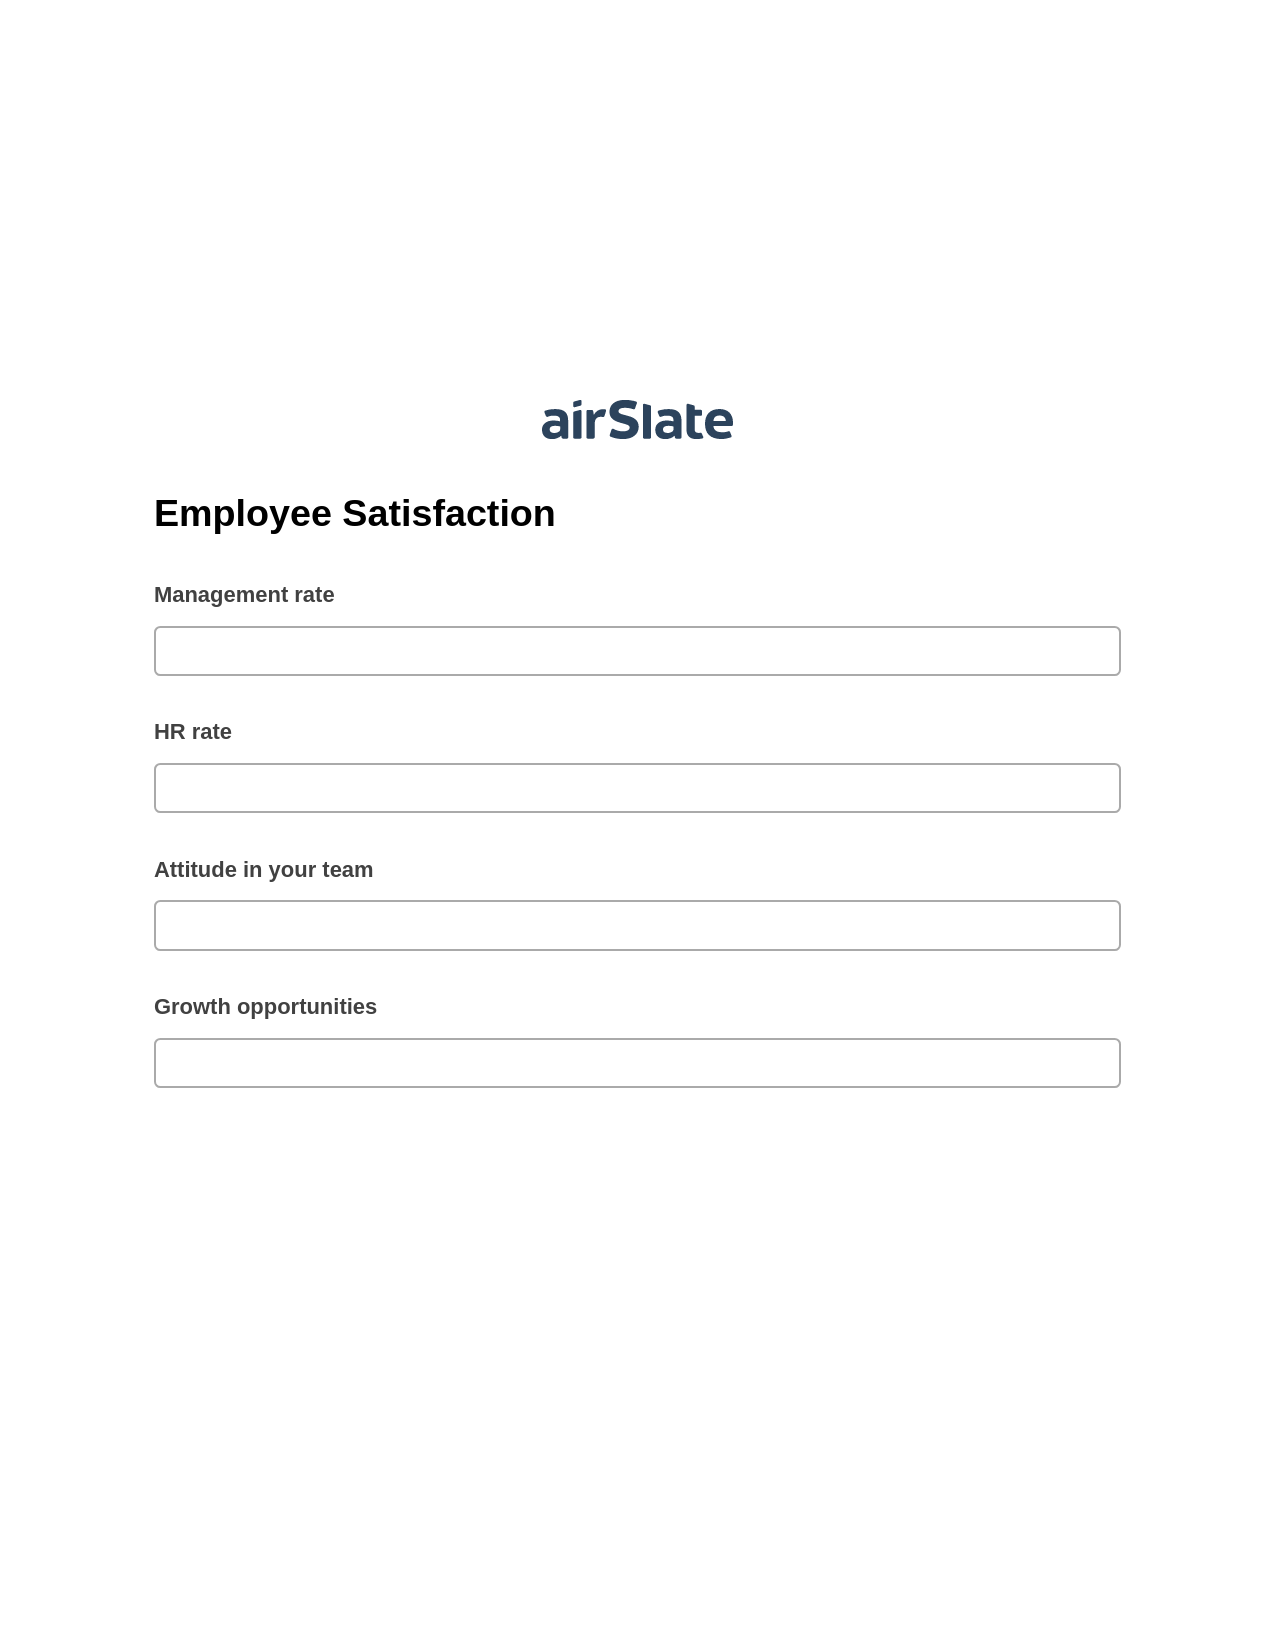 Employee Satisfaction Pre-fill from CSV File Bot, Create slate from another Flow Bot, Export to Google Sheet Bot